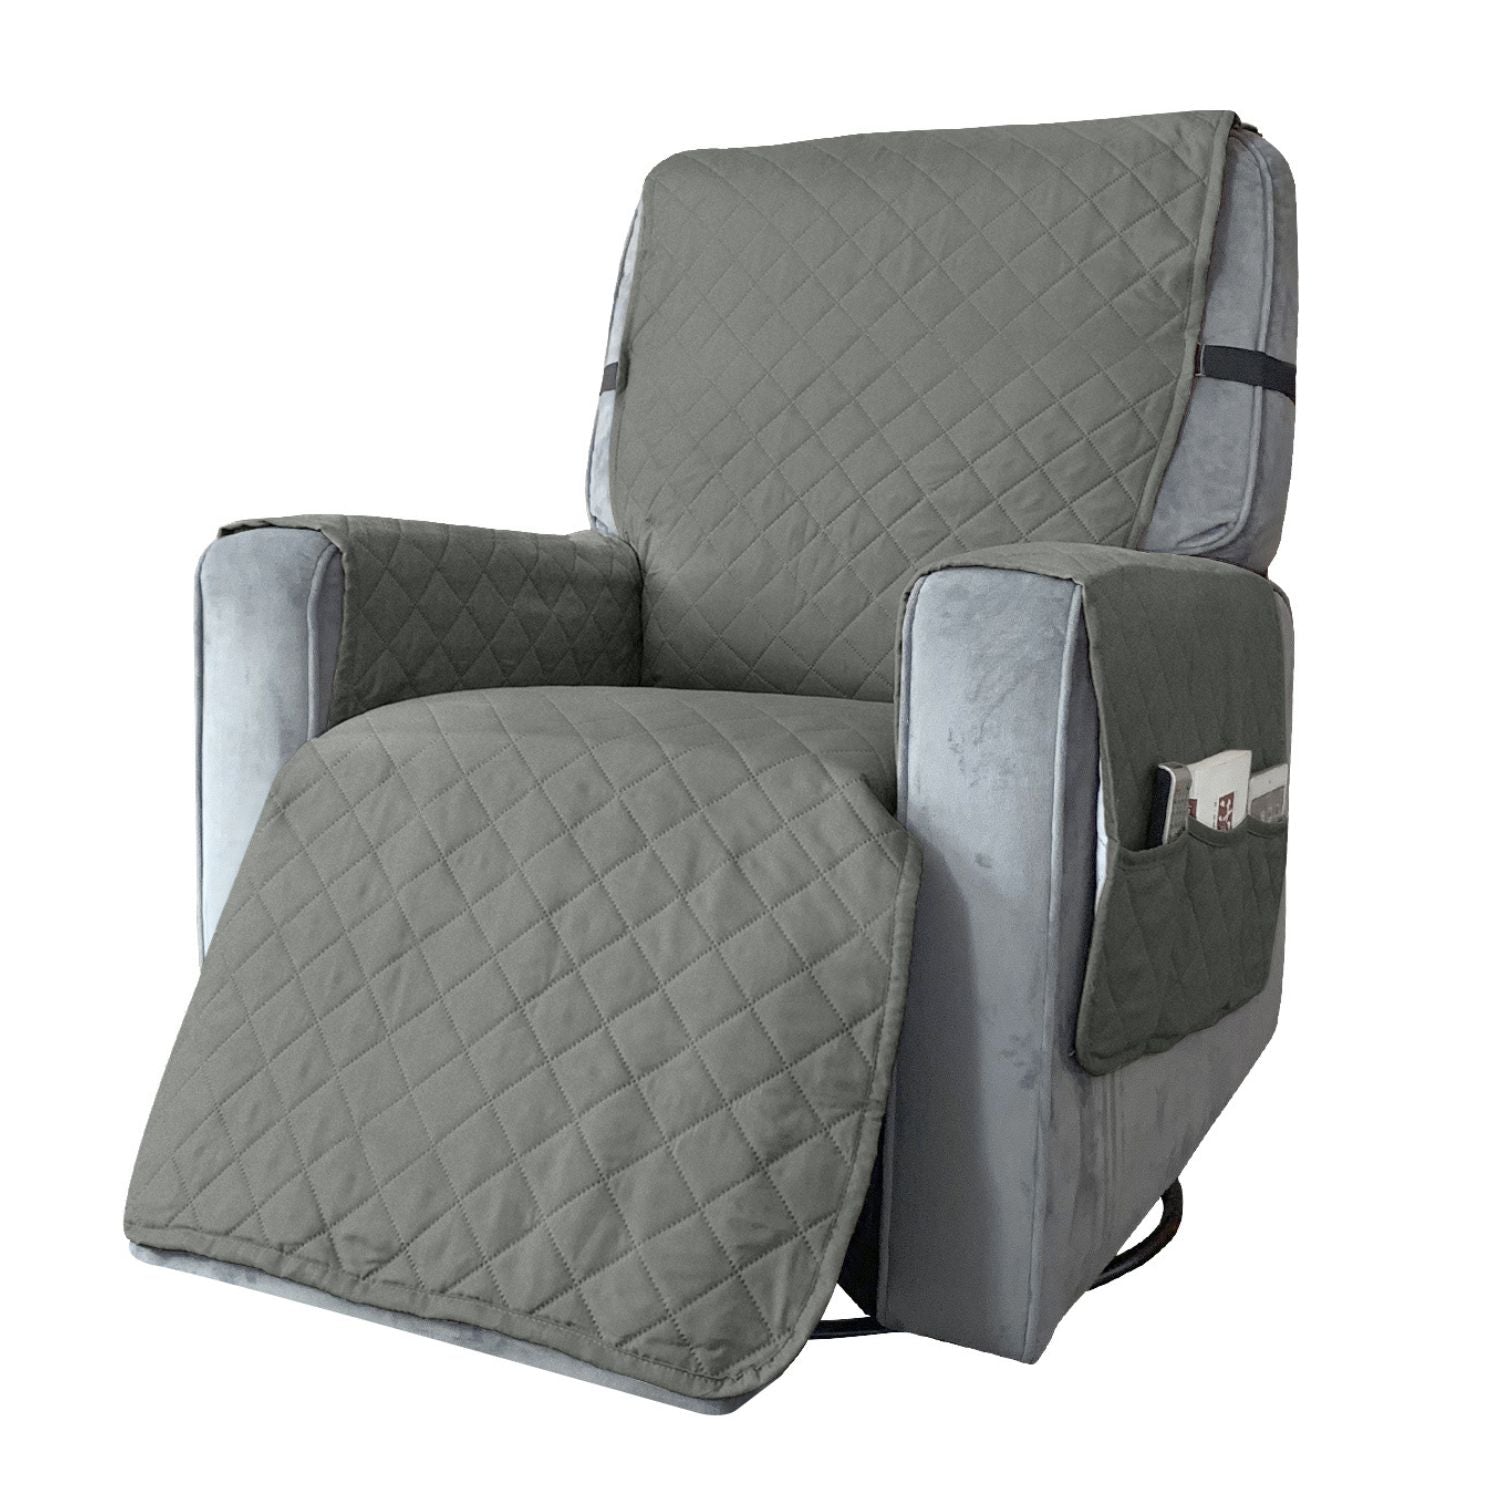 FLOOFI Pet Sofa Cover Recliner Chair L Size with Pocket (Light Grey)